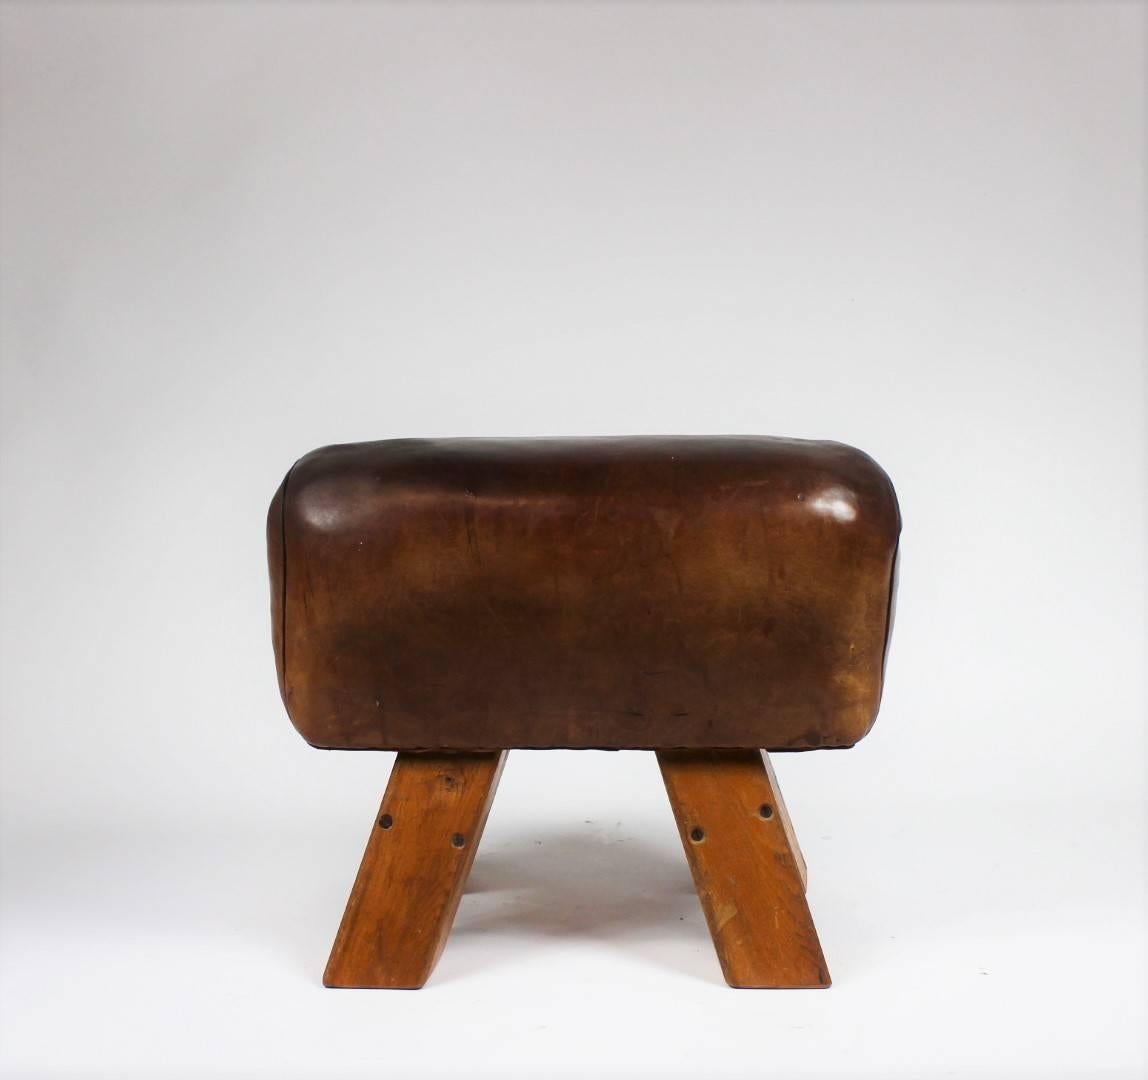 Leather gym seat from the 1950s. It is in its original condition, nice patina.